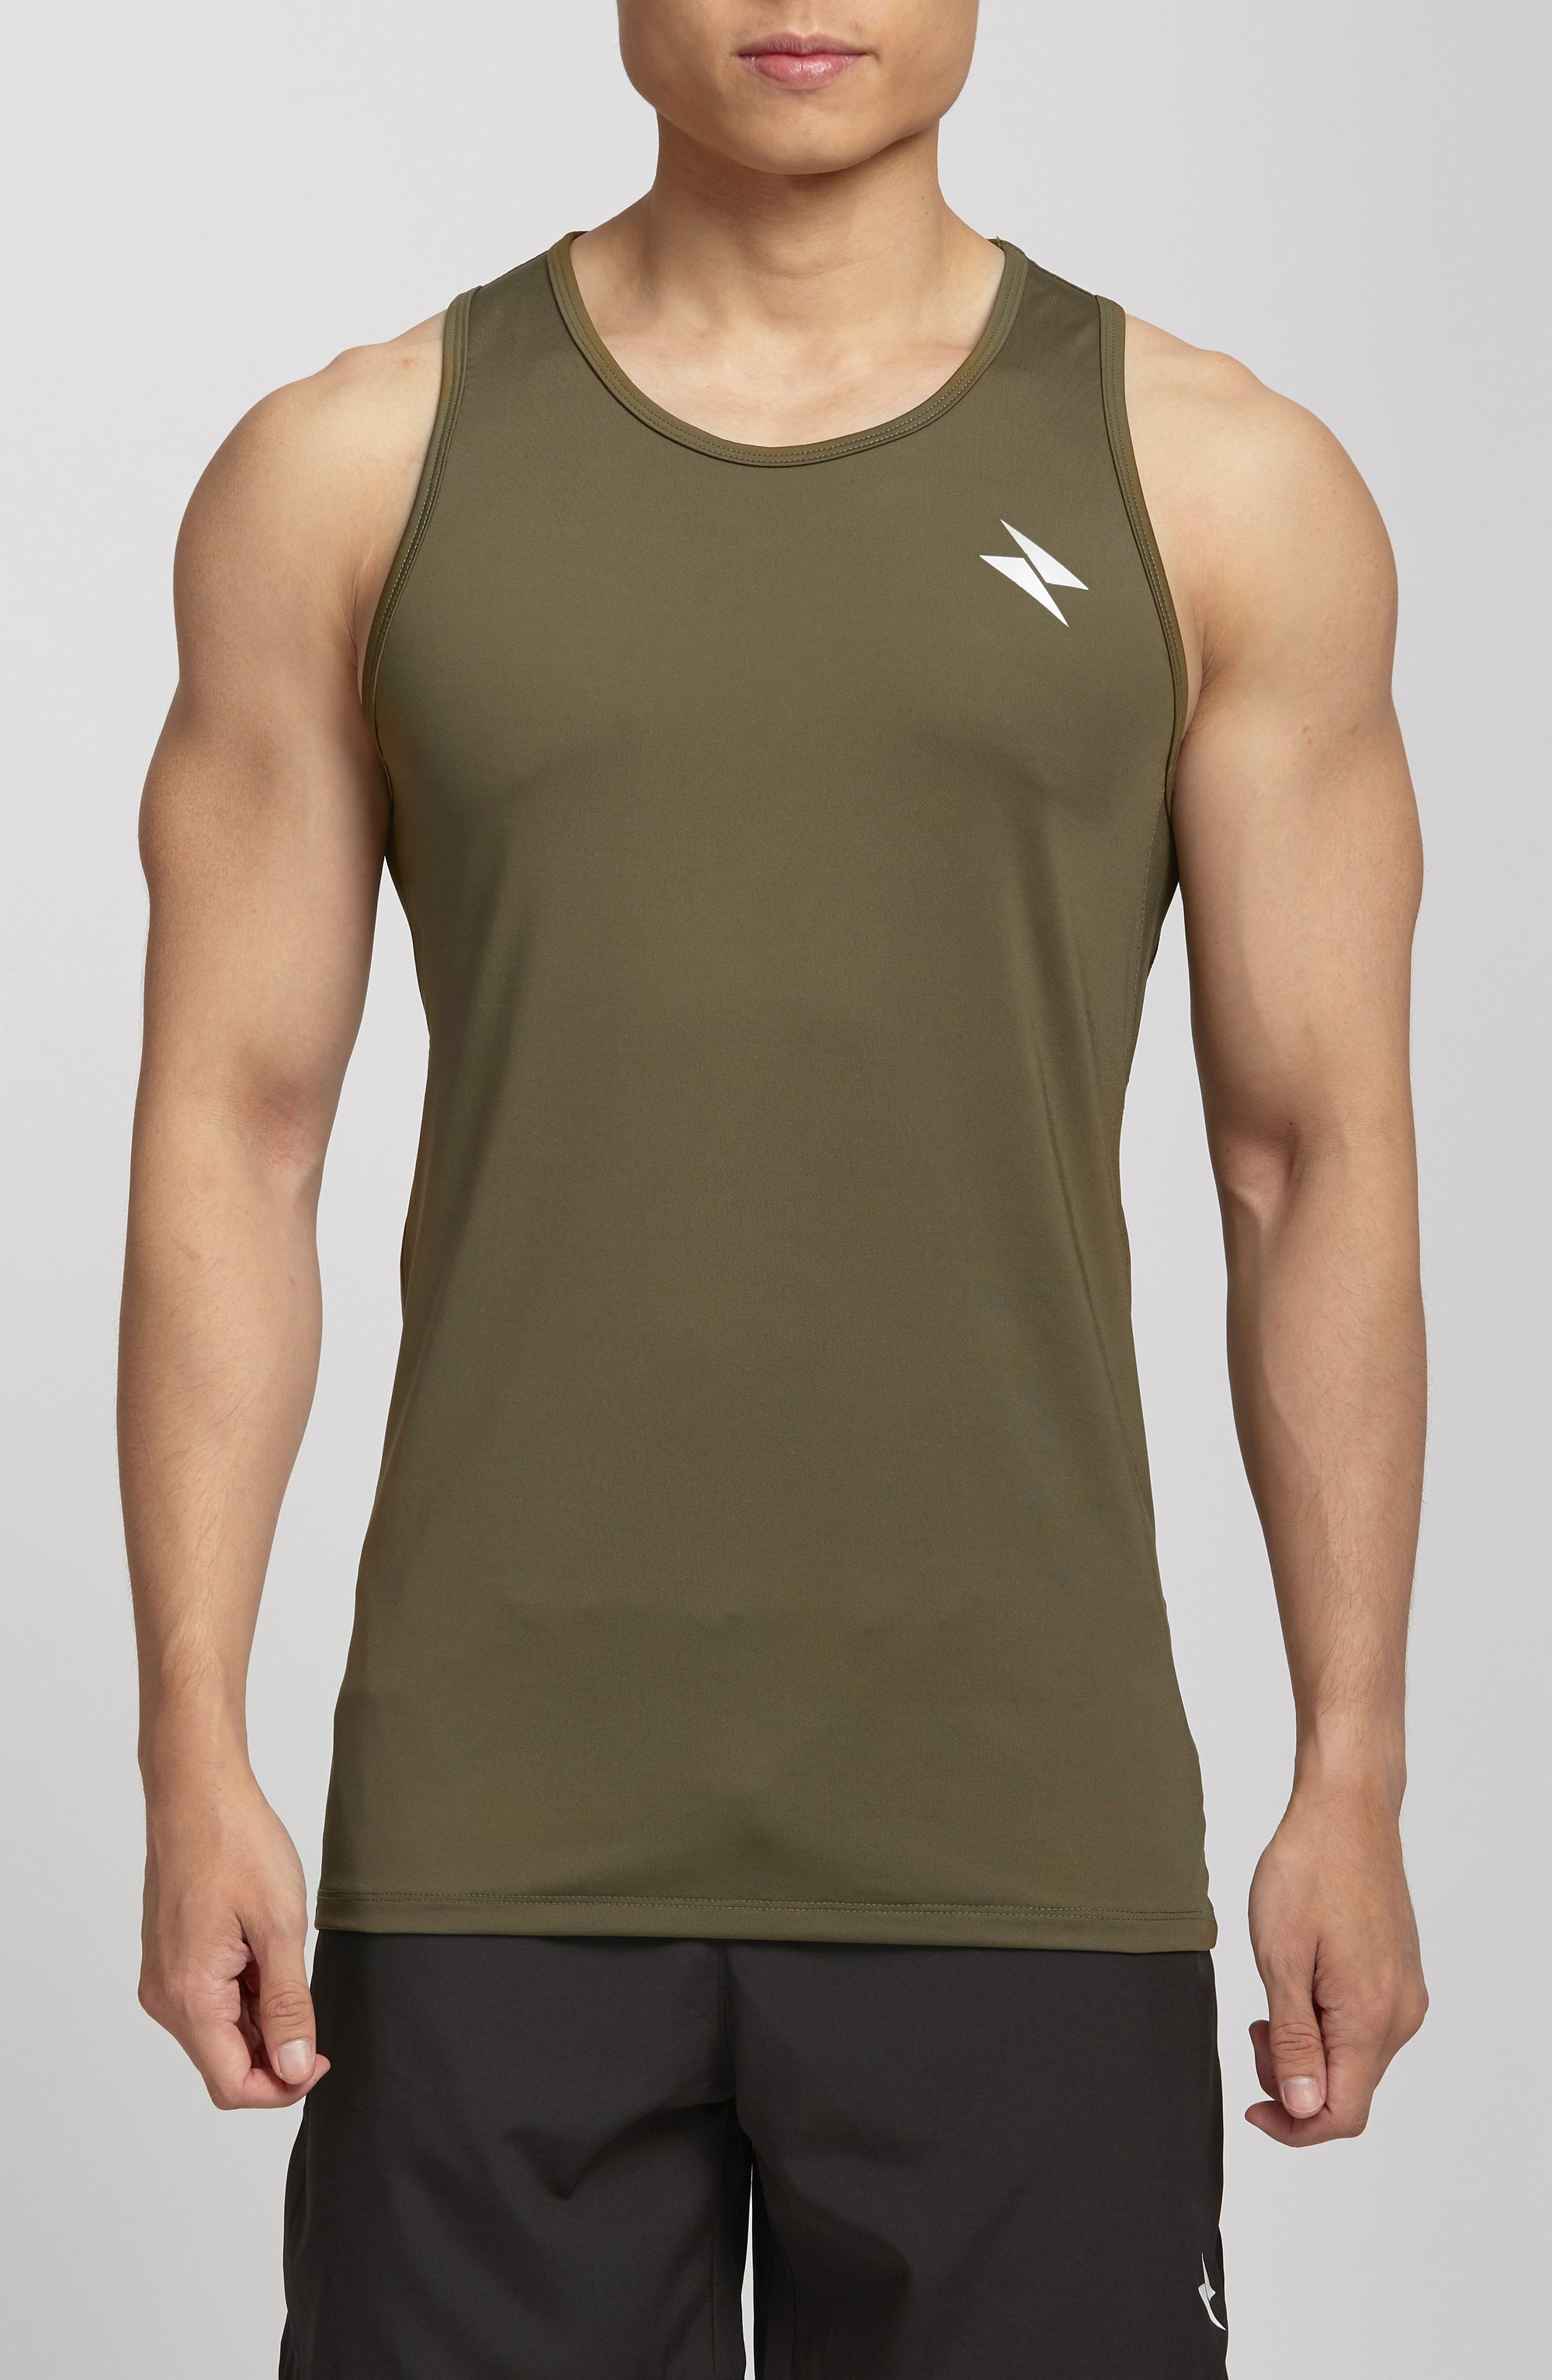 Athletic Tank Top By Zelos Size: Large